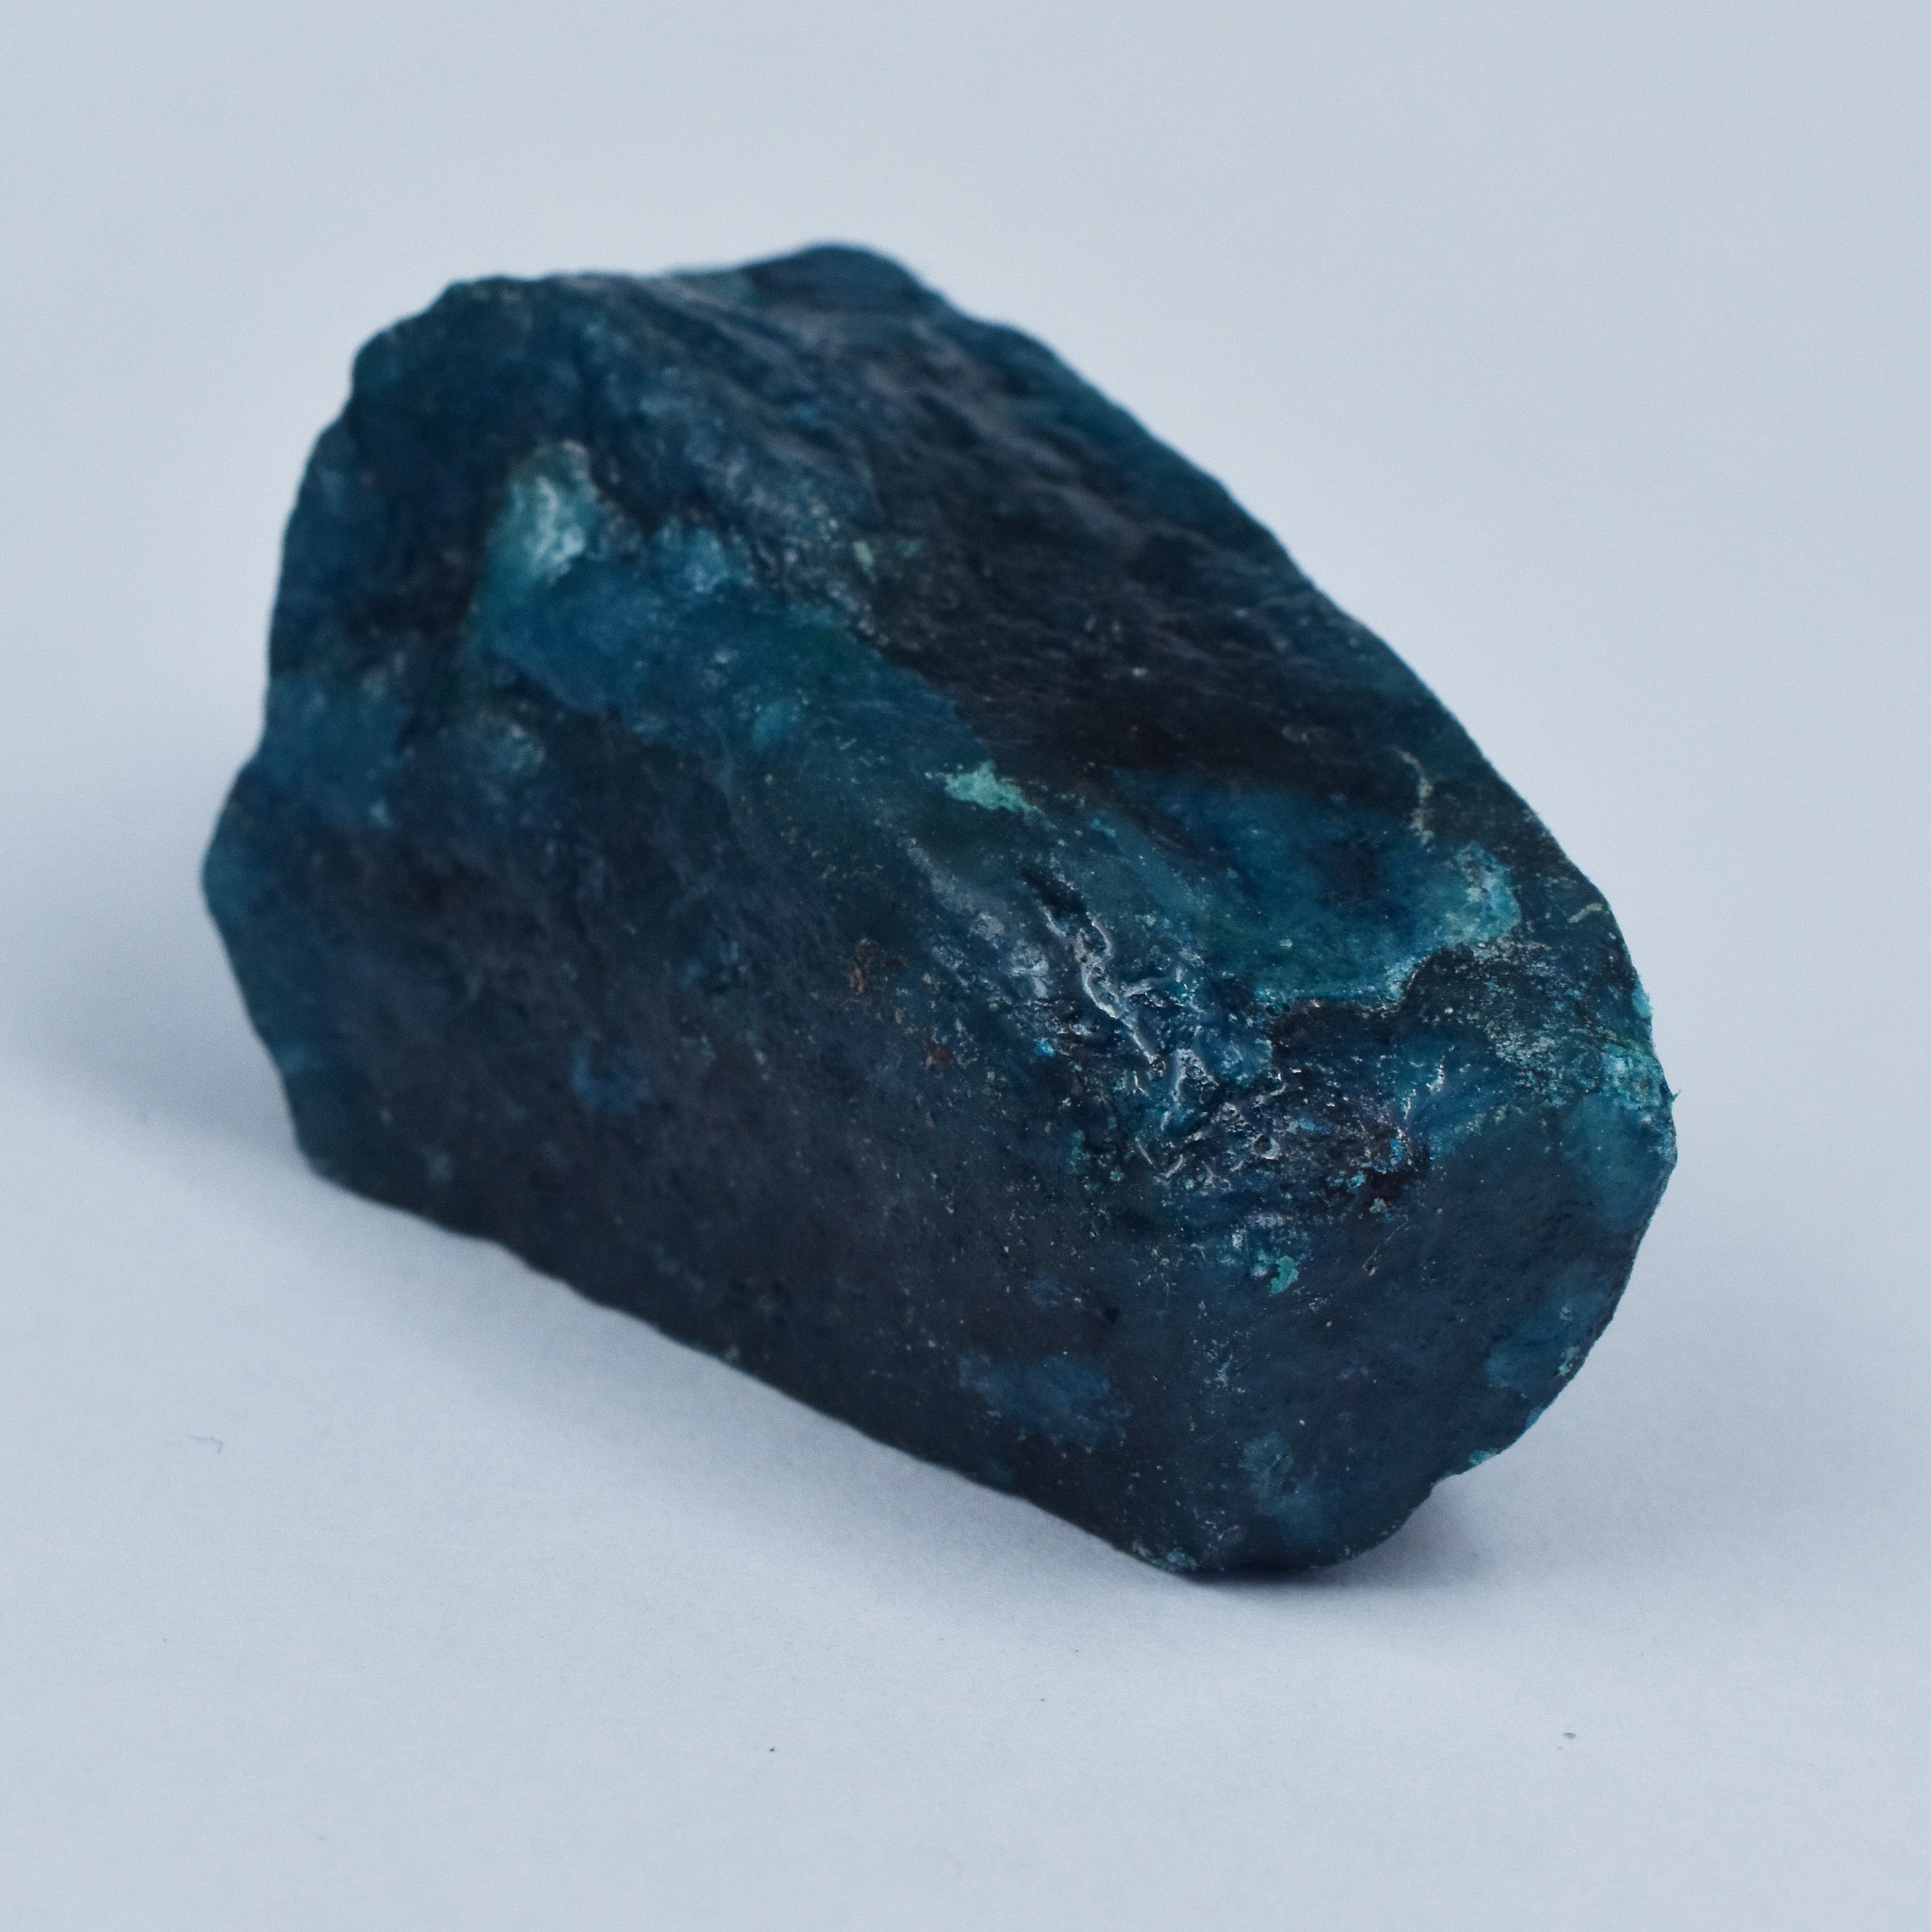 ON Best Price !! Natural Blue Rare Aquamarine Rough 1000 Carat Raw Best For Jewelry, Pendant, Large Aquamarine Rough Excellent Quality Earth Mined Huge Rough